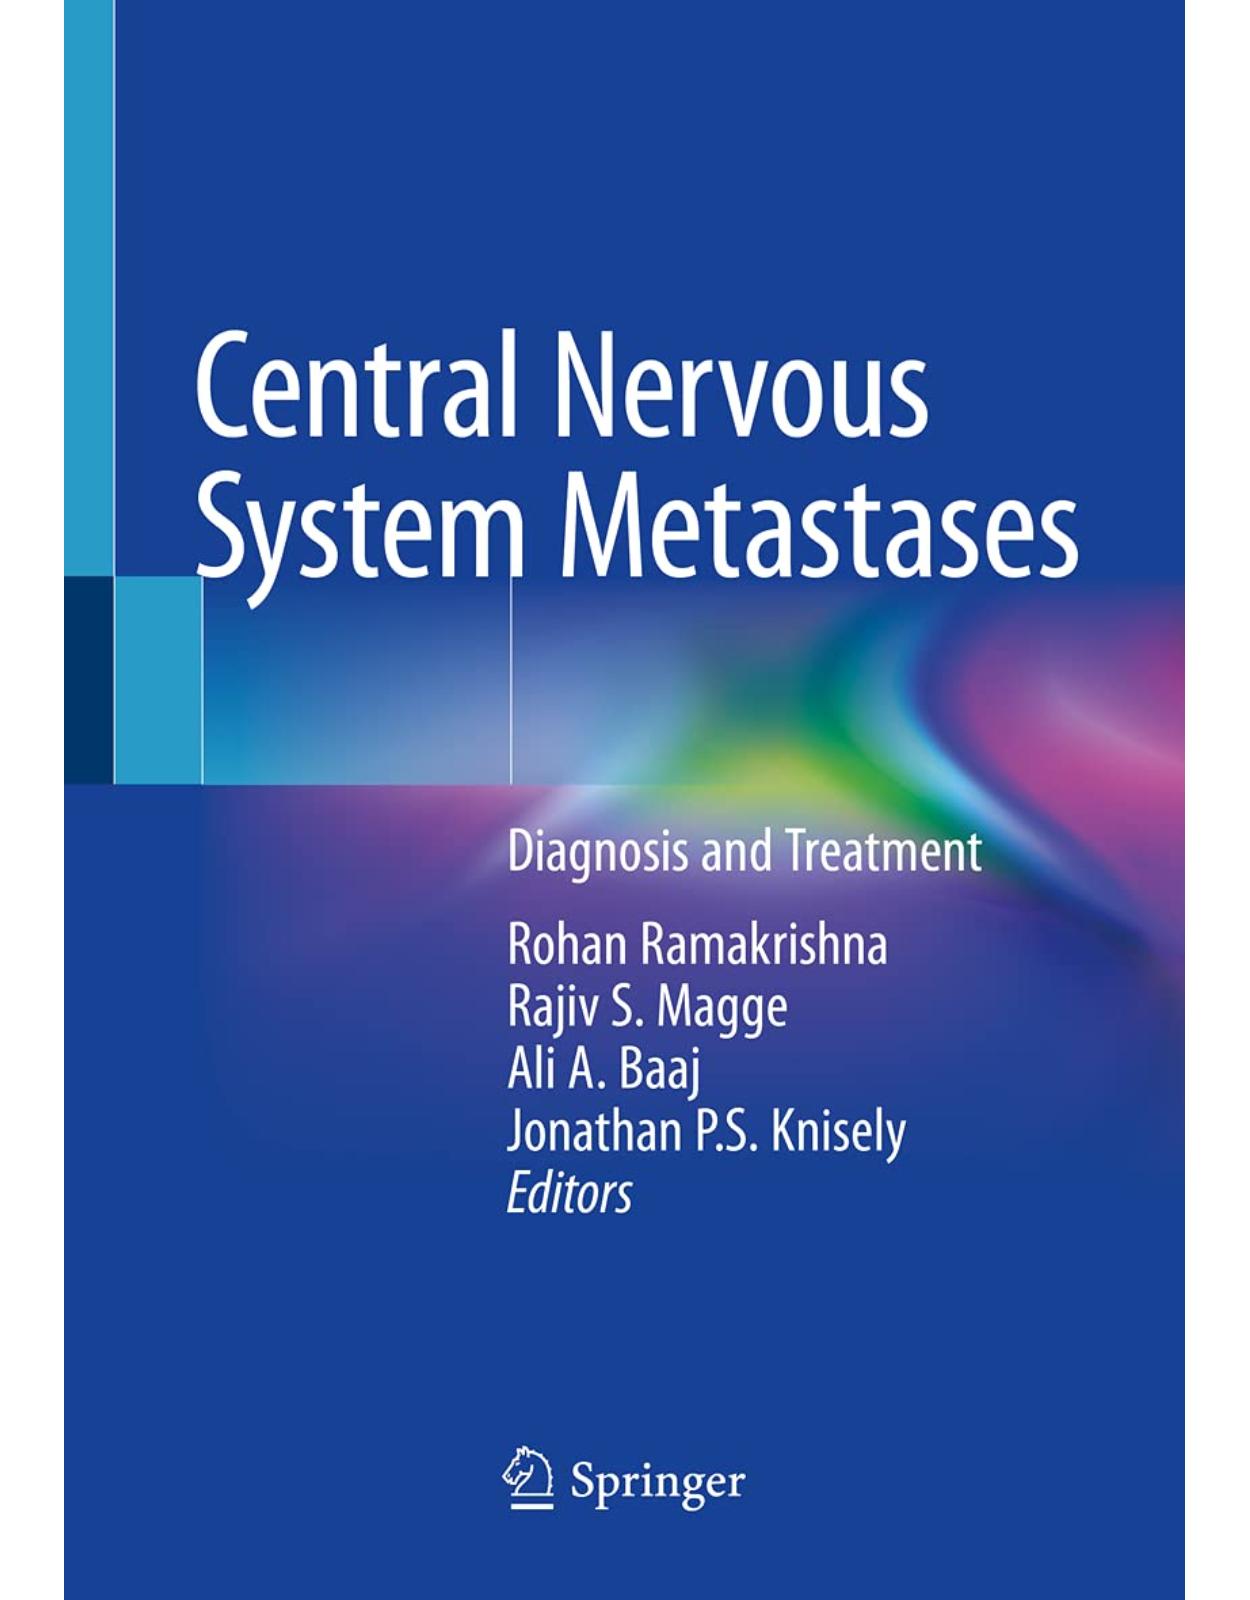 Central Nervous System Metastases: Diagnosis and Treatment